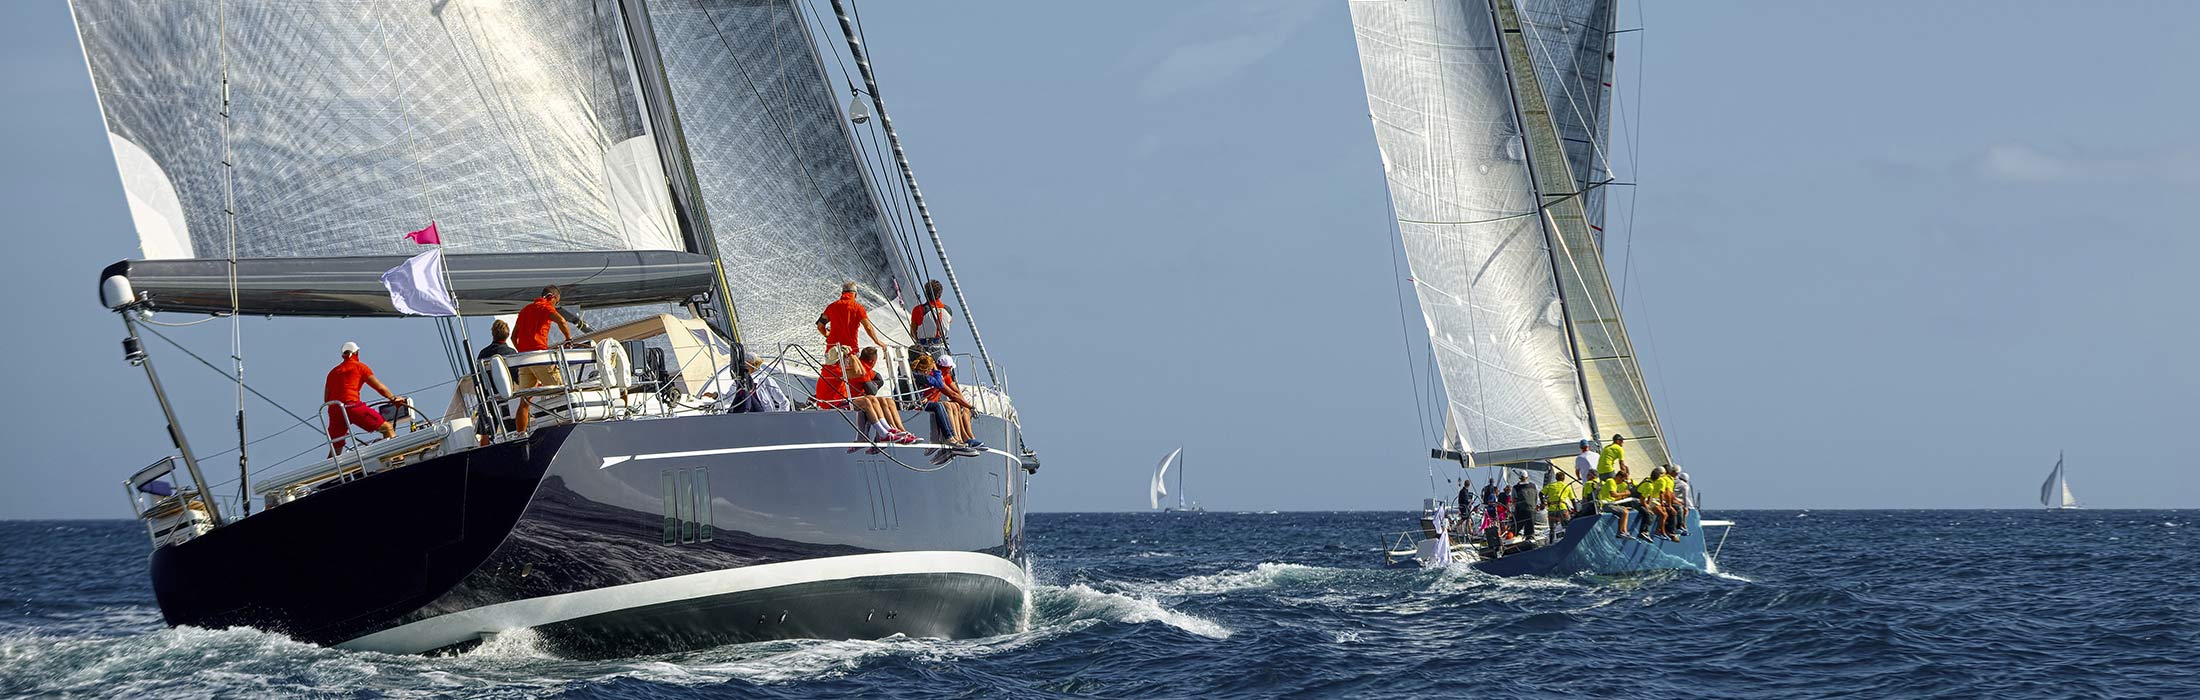 Sailing_Yachts_for_Sale_2.jpg